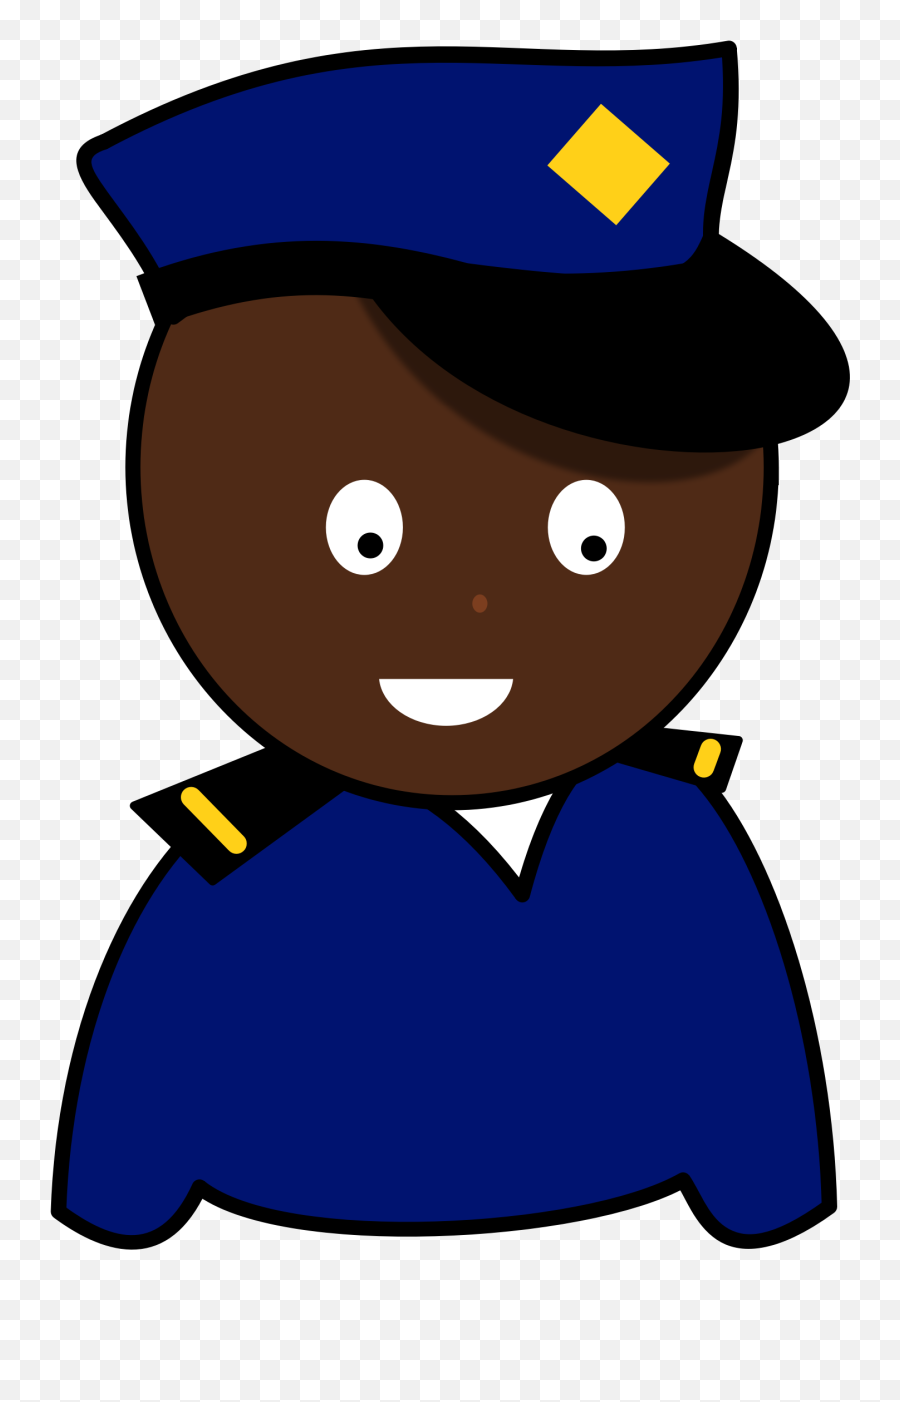 Police Officer Drawing Uniform Police - Transparent Police Officer Clipart Emoji,Police Officer Emoji